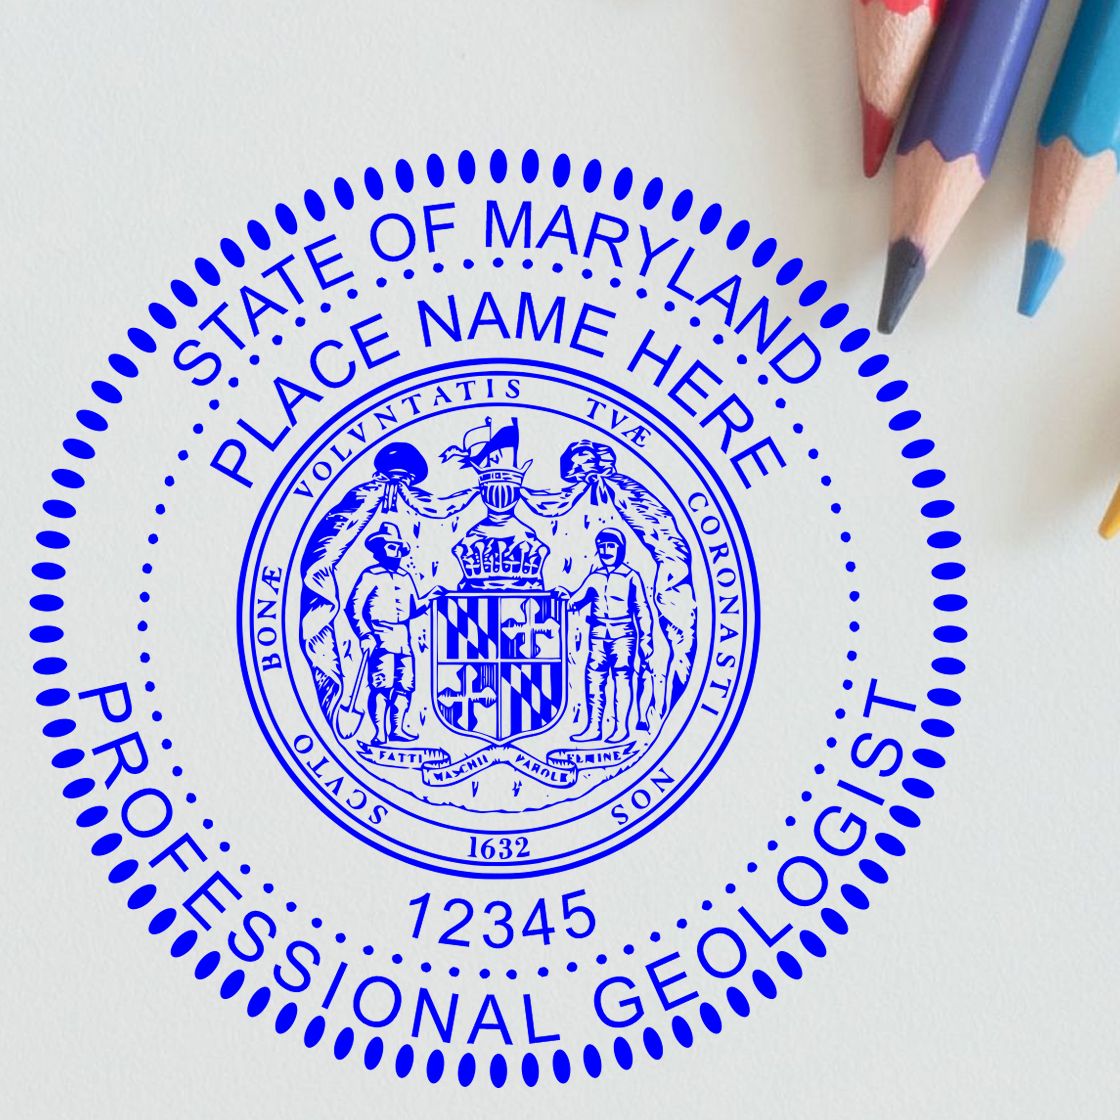 This paper is stamped with a sample imprint of the Self-Inking Maryland Geologist Stamp, signifying its quality and reliability.